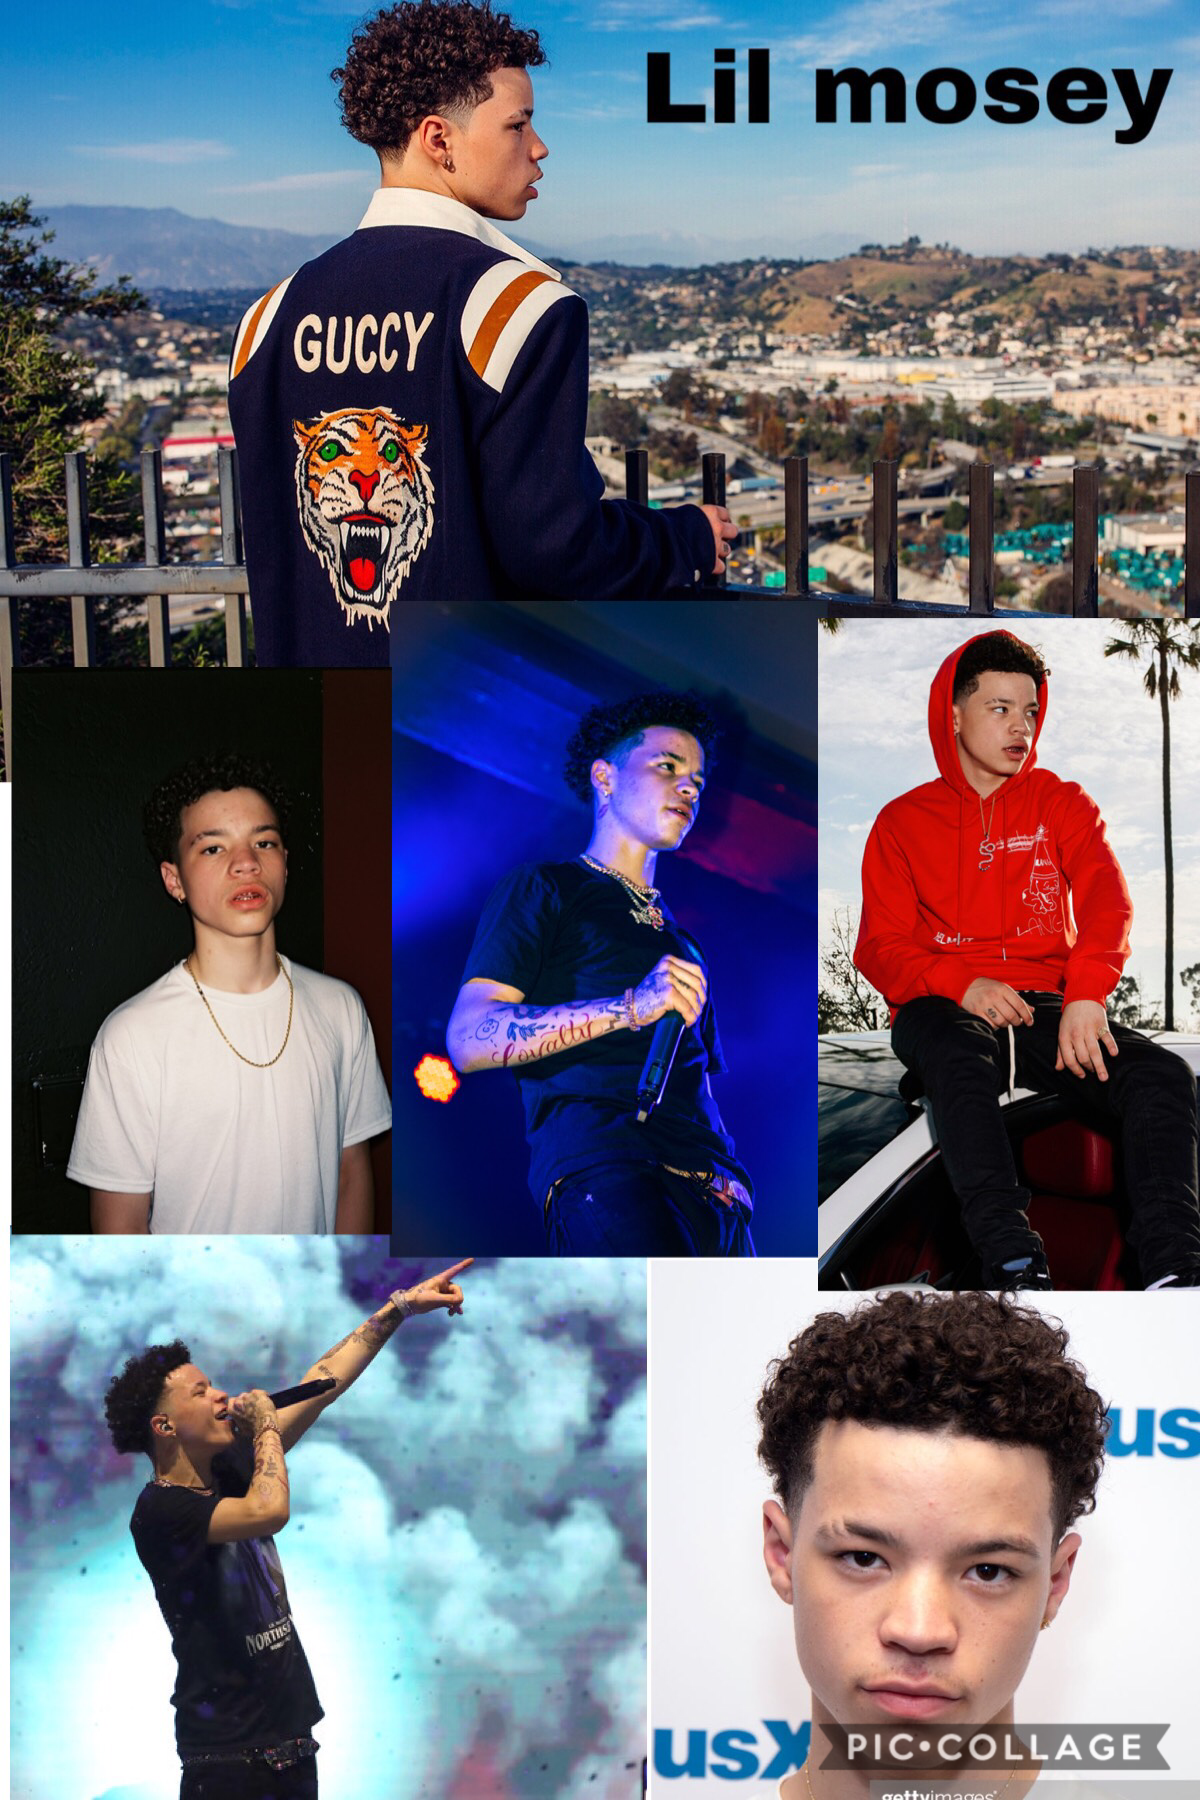 
Lil mosey 